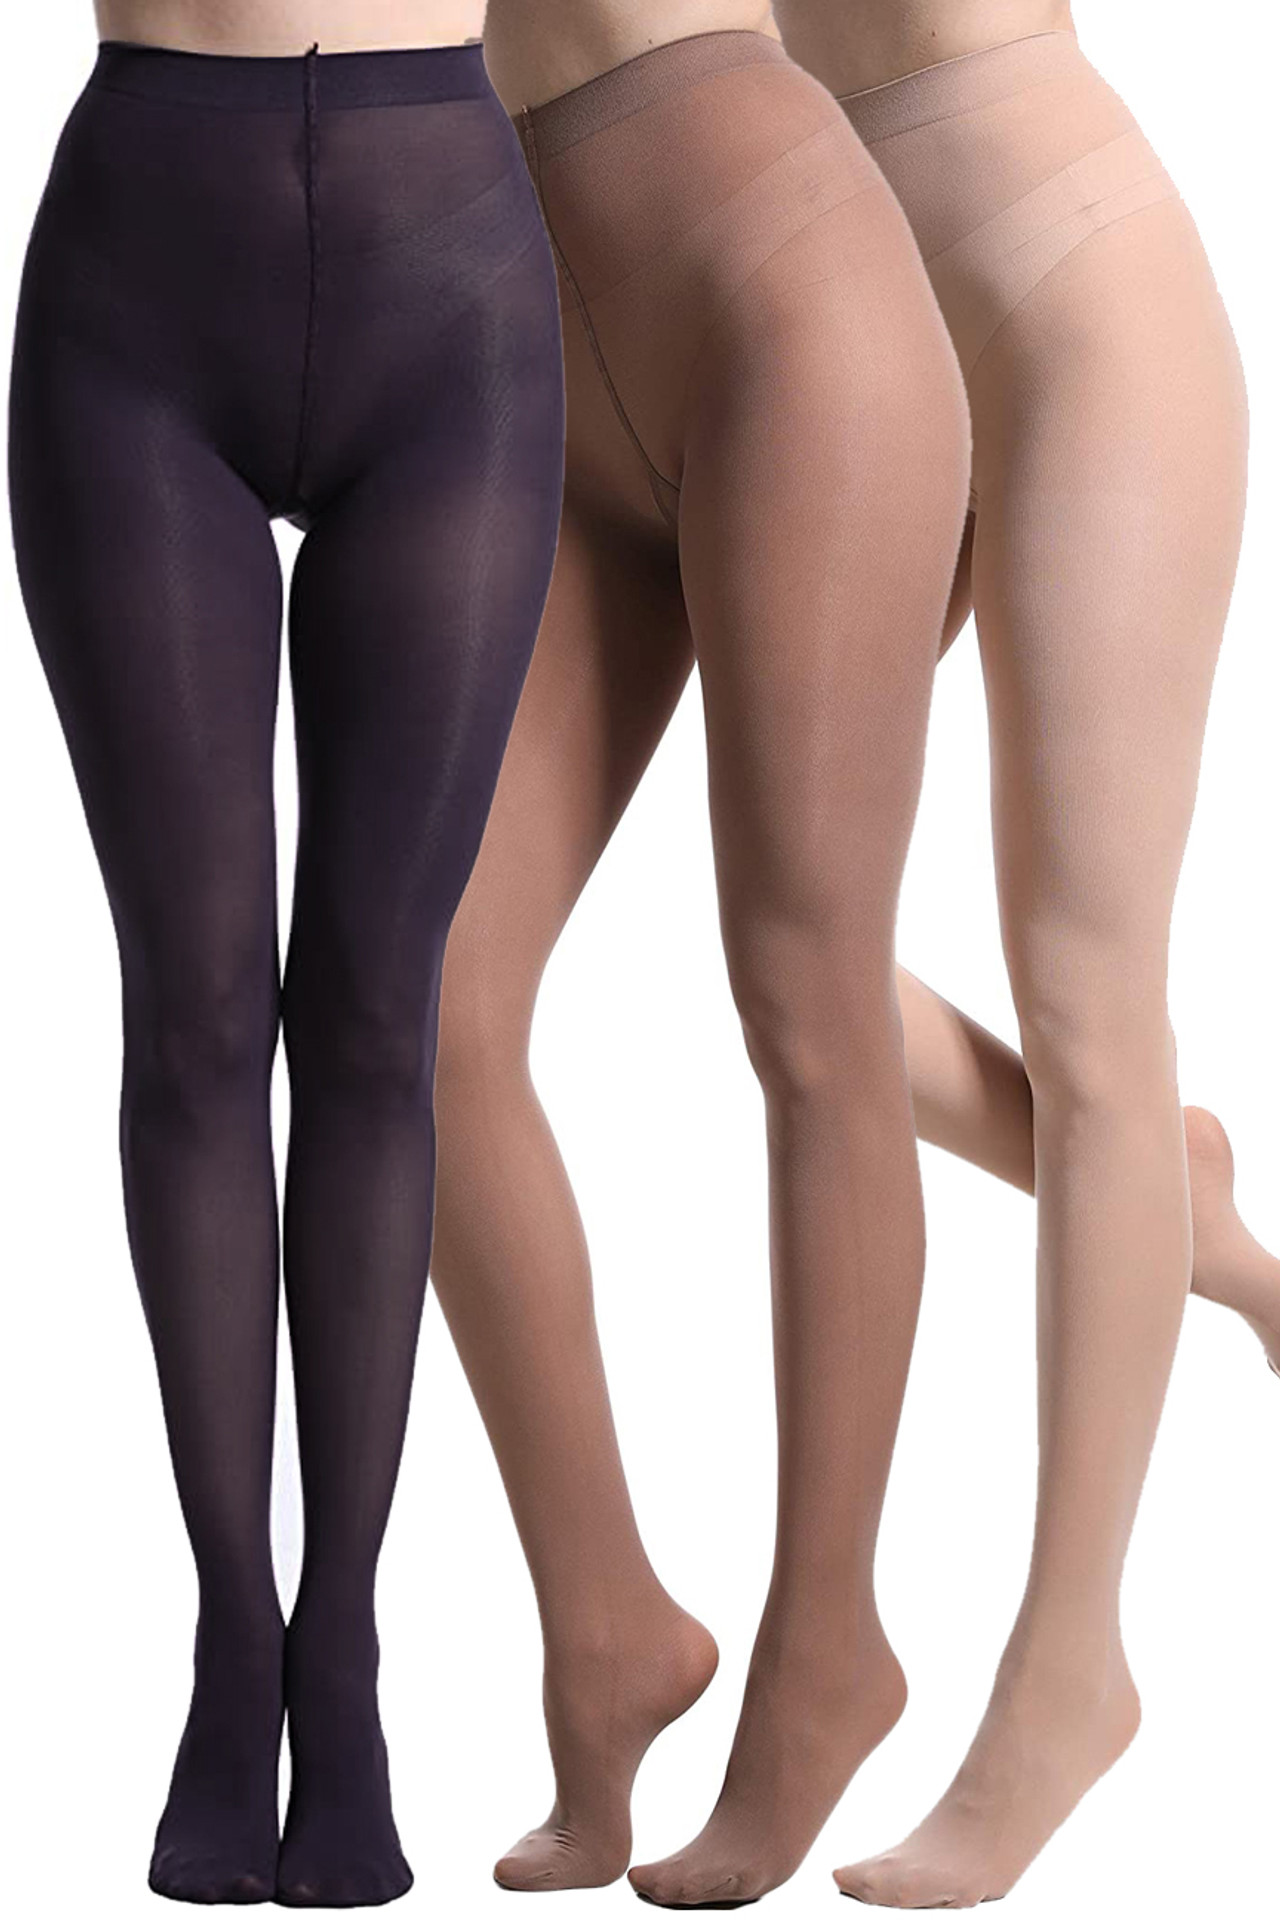 Maura Chanz on X: Are there any “sheer” fleece lined tights for darker skin  tones? I'll look like I have white legs in these…HALP   / X